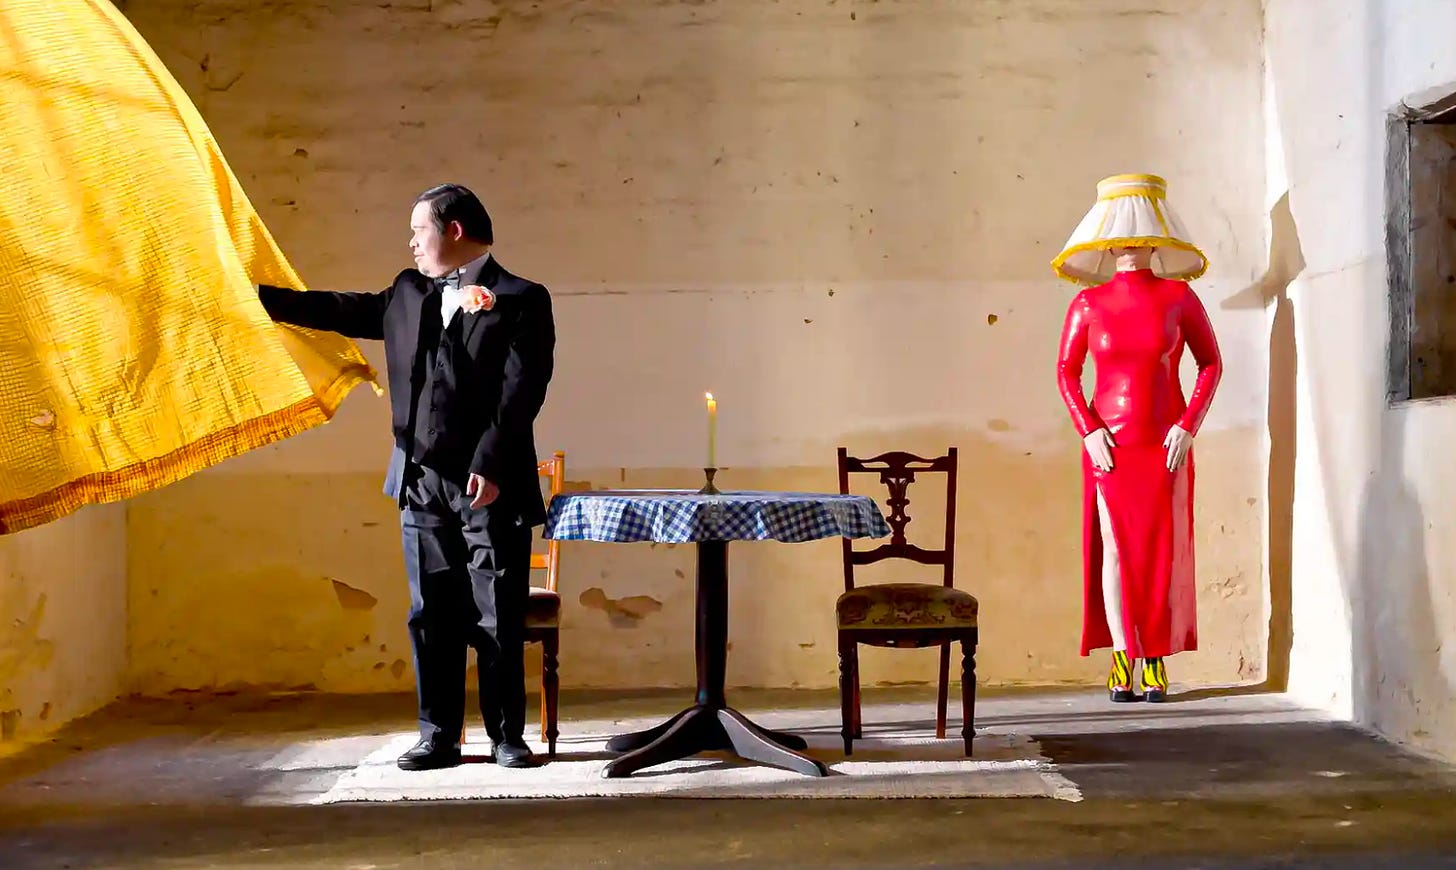 A masc actor in a three-piece suit is looking out a window covered by a yellow curtain, next to a table set for 2. In the back corner of the room/stage, a femme in a red latex suit is a floor lamp, with a shade covering her head.